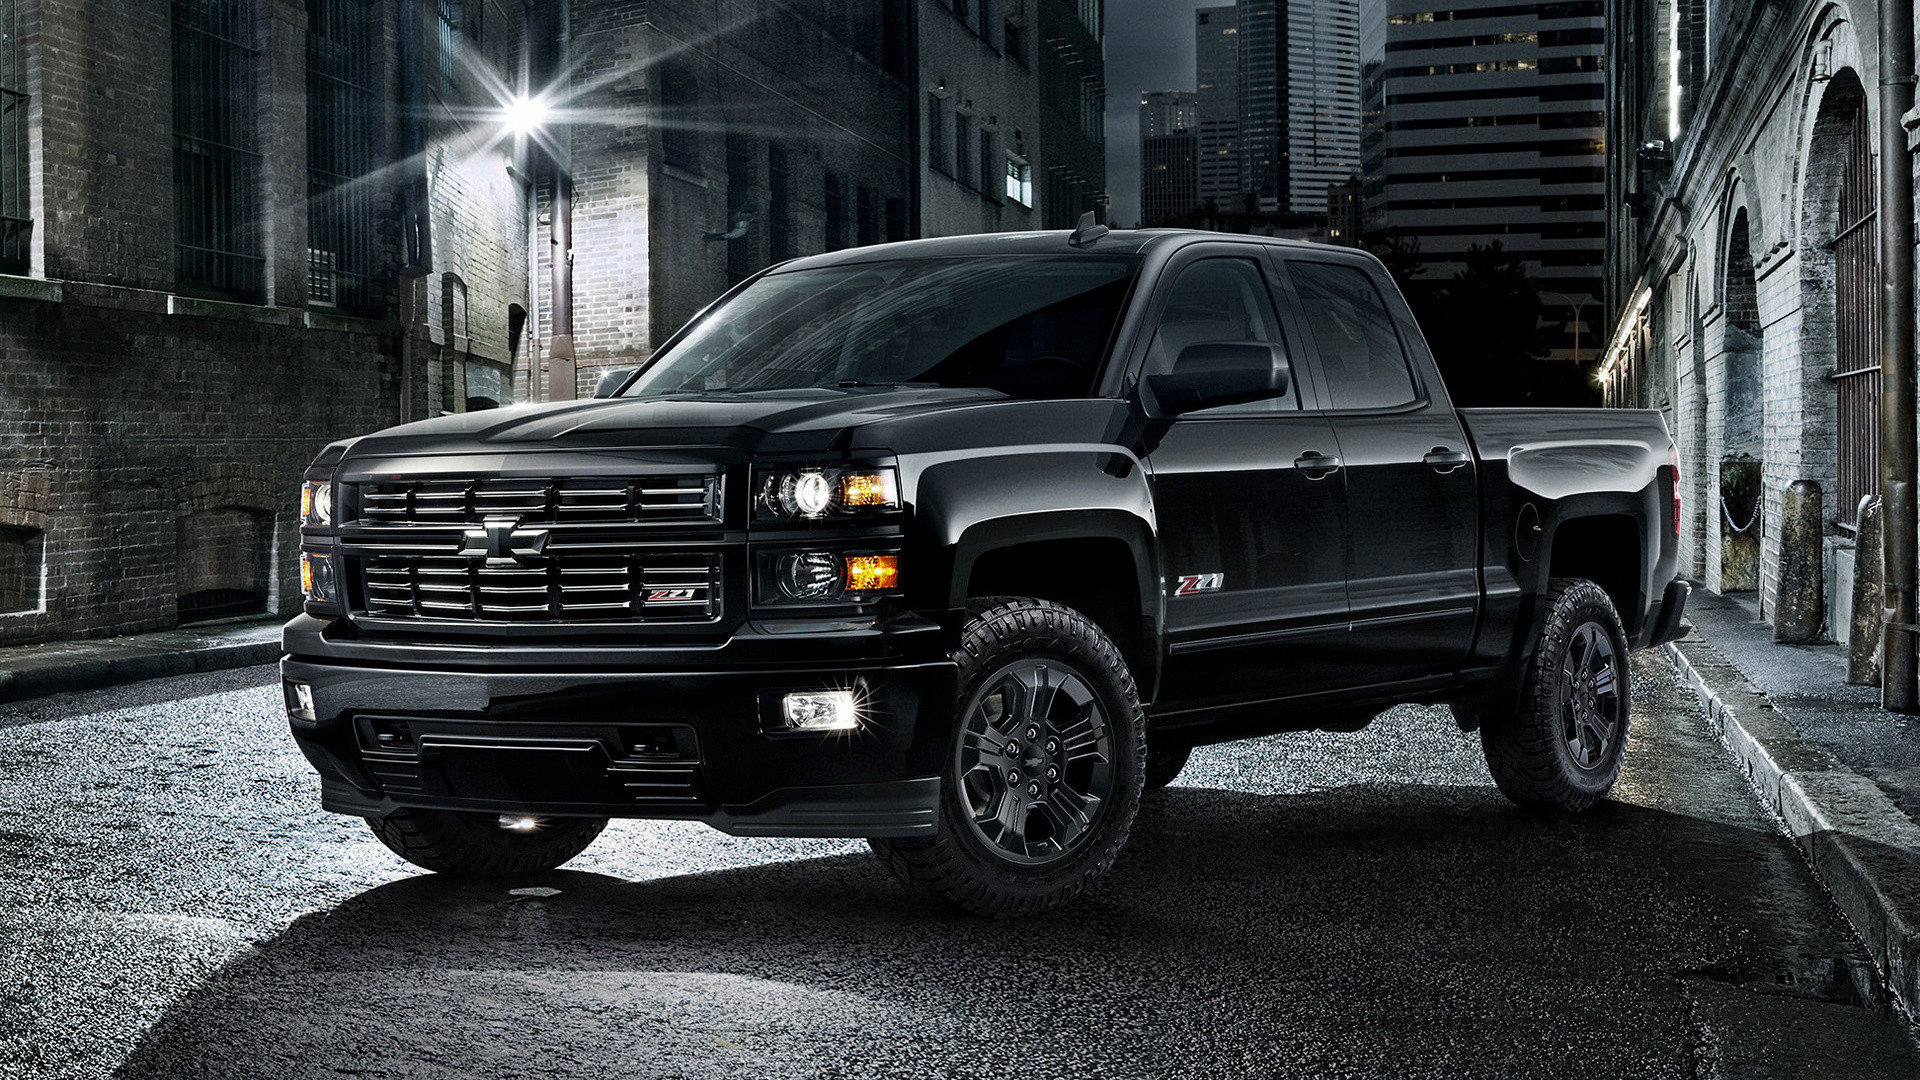 Chevy Trucks Wallpapers (45+ images)